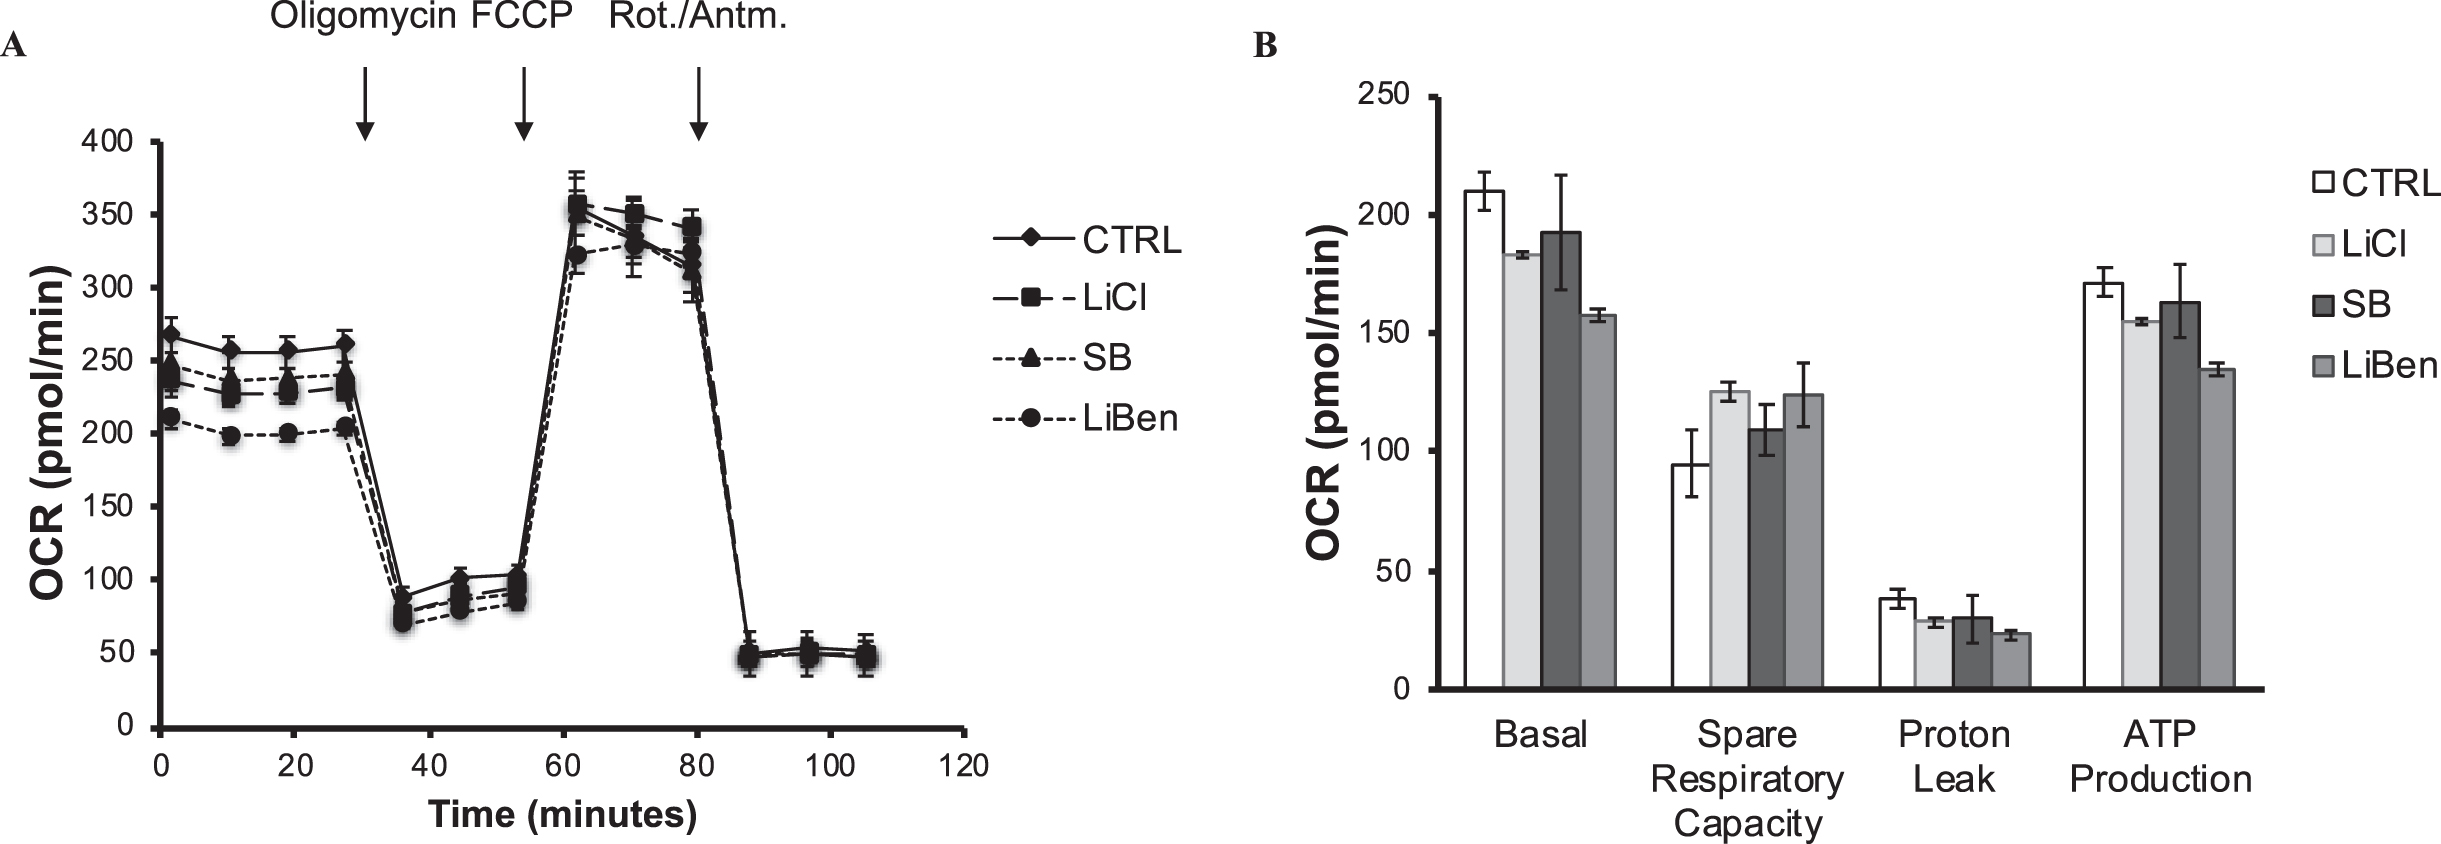 Analysis of the impact of lithium chloride, sodium benzoate and lithium benzoate on mitochondrial functions. Primary rat cortical neuron cultures were treated with lithium chloride (LiCl), sodium benzoate (SB), or lithium benzoate (LiBen) at 3 mM for 24 h prior to analysis of mitochondrial function. The Seahorse XF96 analyzer was employed to determine the mitochondrial oxygen consumption rate and mitochondrial ATP production. A) The mitochondrial oxygen consumption profile of mitochondrial stress test for neuronal culture. B) Bar graph represents the key parameters of metabolic function including basal respiration, ATP production, proton leak, and spare respiratory capacity of the treated neuronal cells. Data represent mean ± SD from N = 3 for each experiment condition. CTRL, Control; FCCP, Carbonyl cyanide p-trifluoro-methoxyphenyl hydrazone; OCR, Oxygen consumption rate; ROT., Rotenone; Antm., Antimycin A.